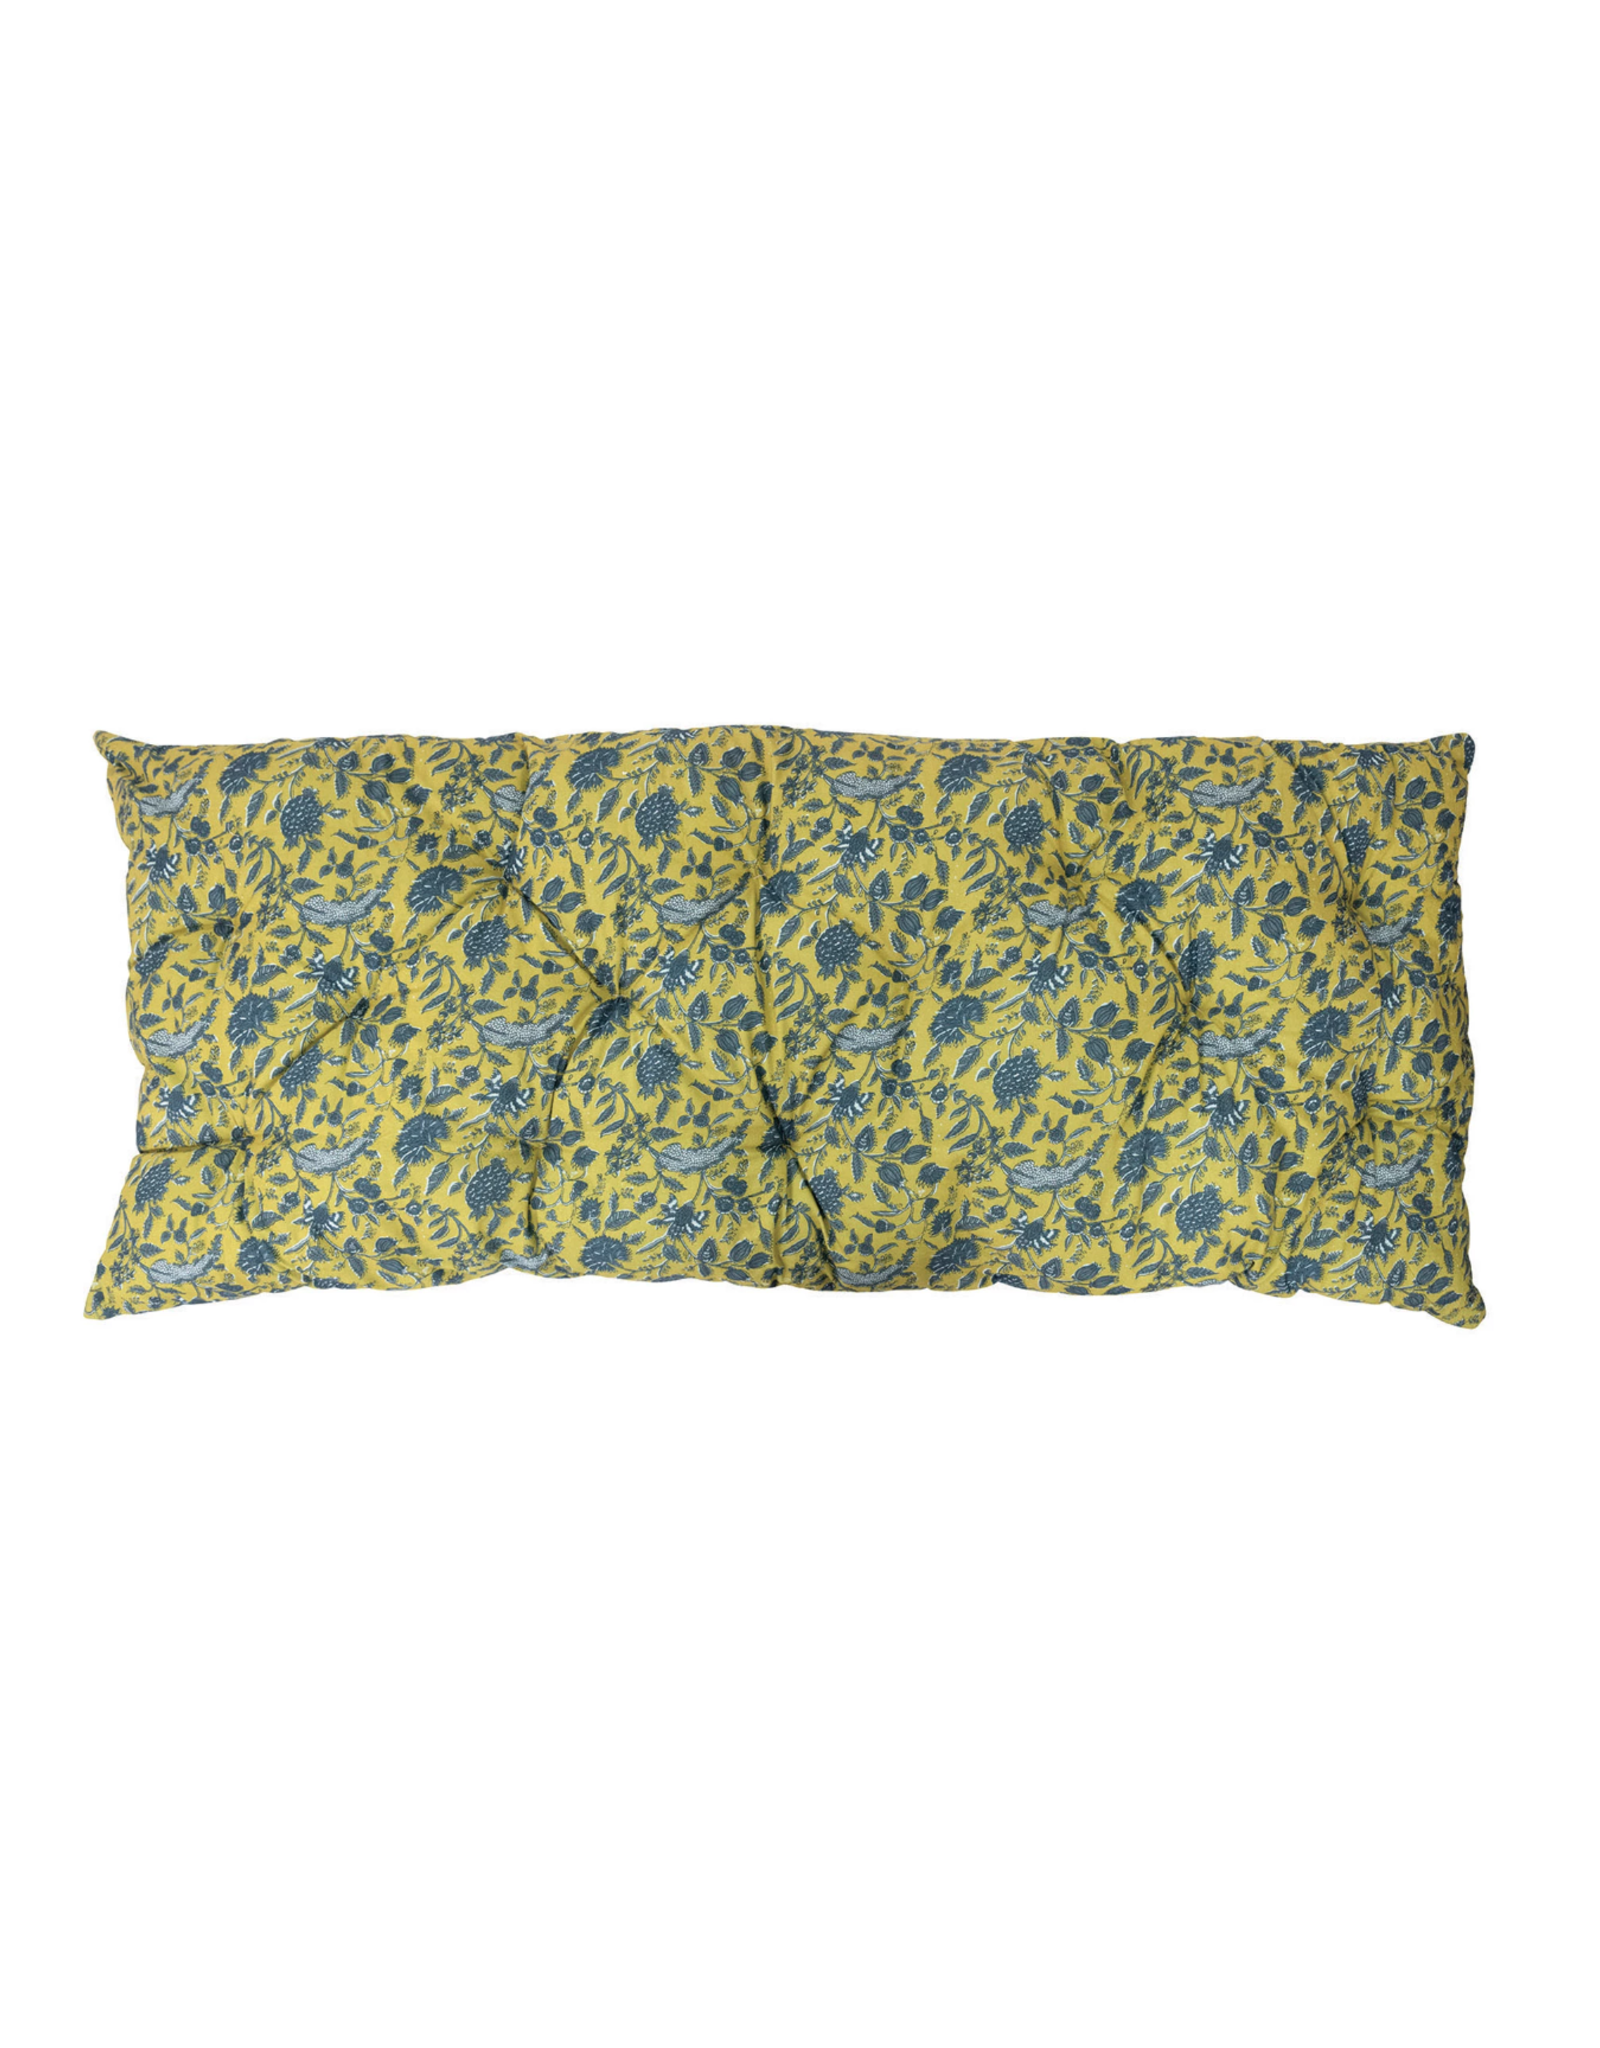 Cotton Tufted French Cushion - Chartreuse - Curbside Pick Up Only!